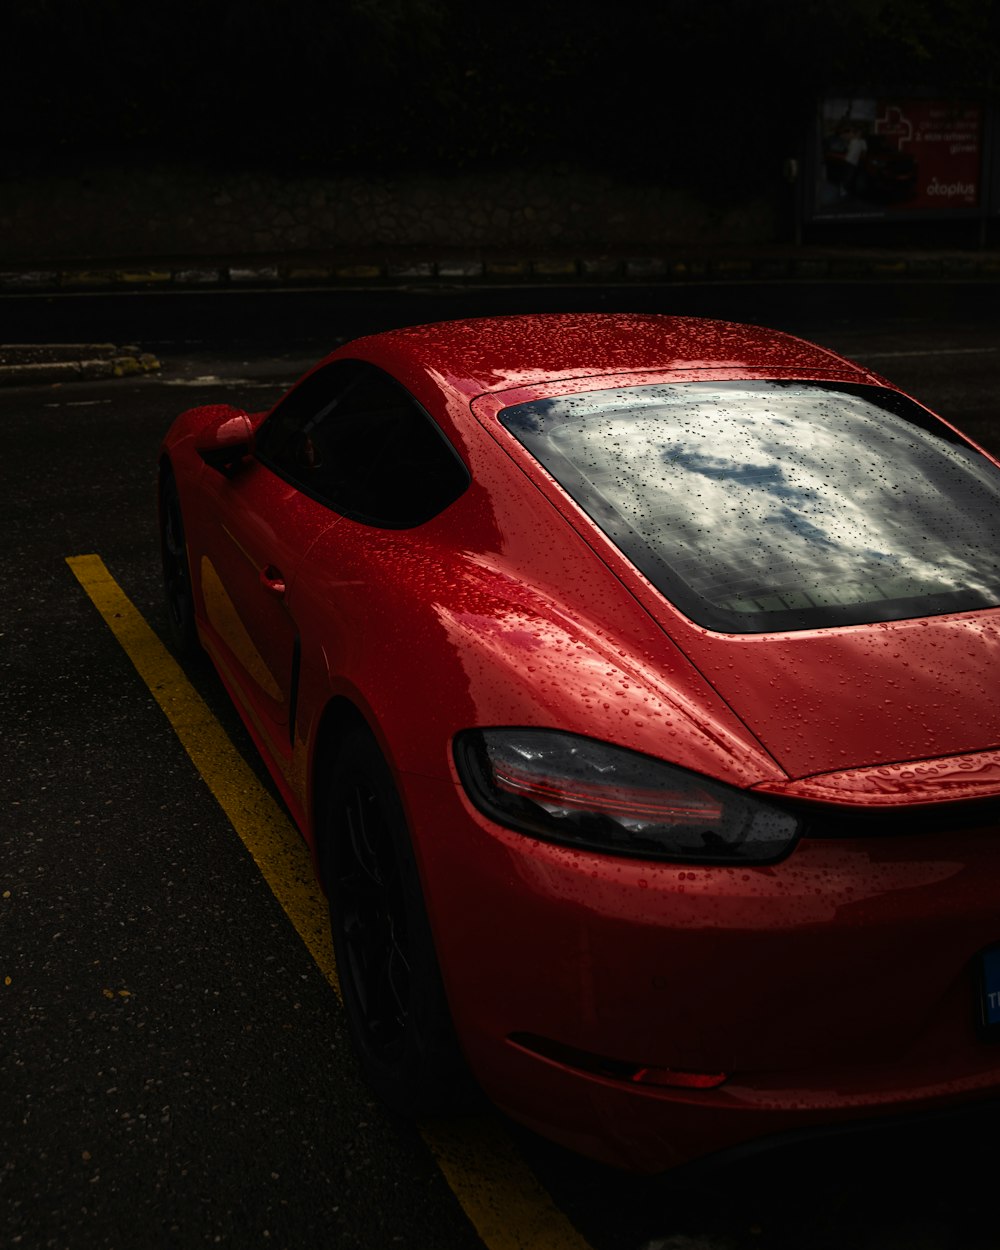 a red sports car parked in a parking lot